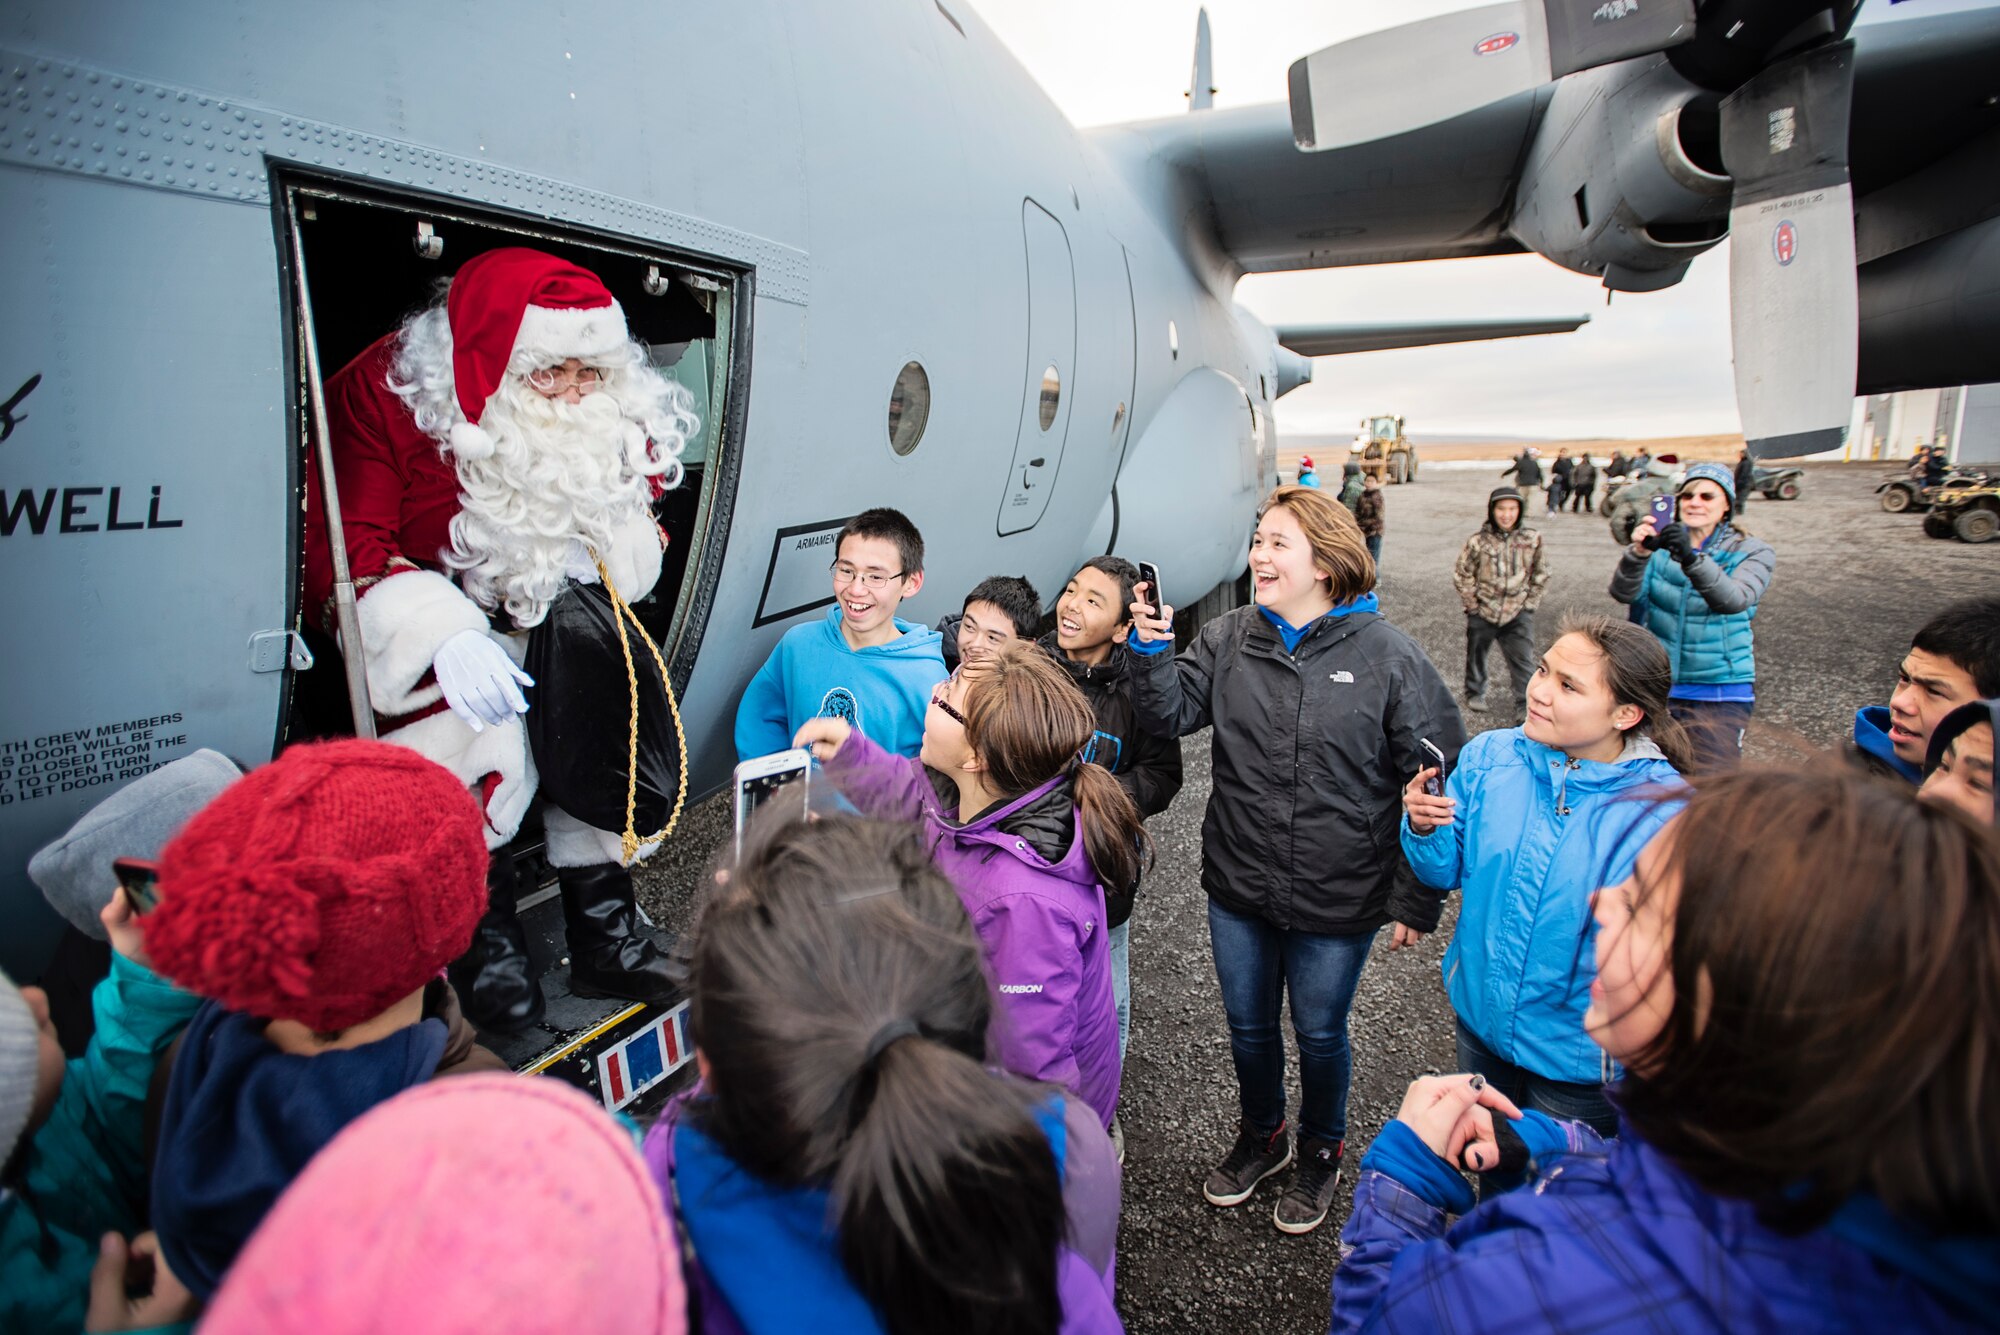 JOINT BASE ELMENDORF-RICHARDSON, Alaska -- Children in Savoonga, Alaska, greet Santa Claus as he emerges from a C-130 Hercules aircraft from the 144th Airlift Squadron, Alaska Air National Guard, Oct. 16, during this year's Operation Santa mission. This year marks the 59th year of the program, which serves to bring Christmas to underserved, remote villages across Alaska each year. (U.S. National Guard photo by Staff Sgt. Edward Eagerton)